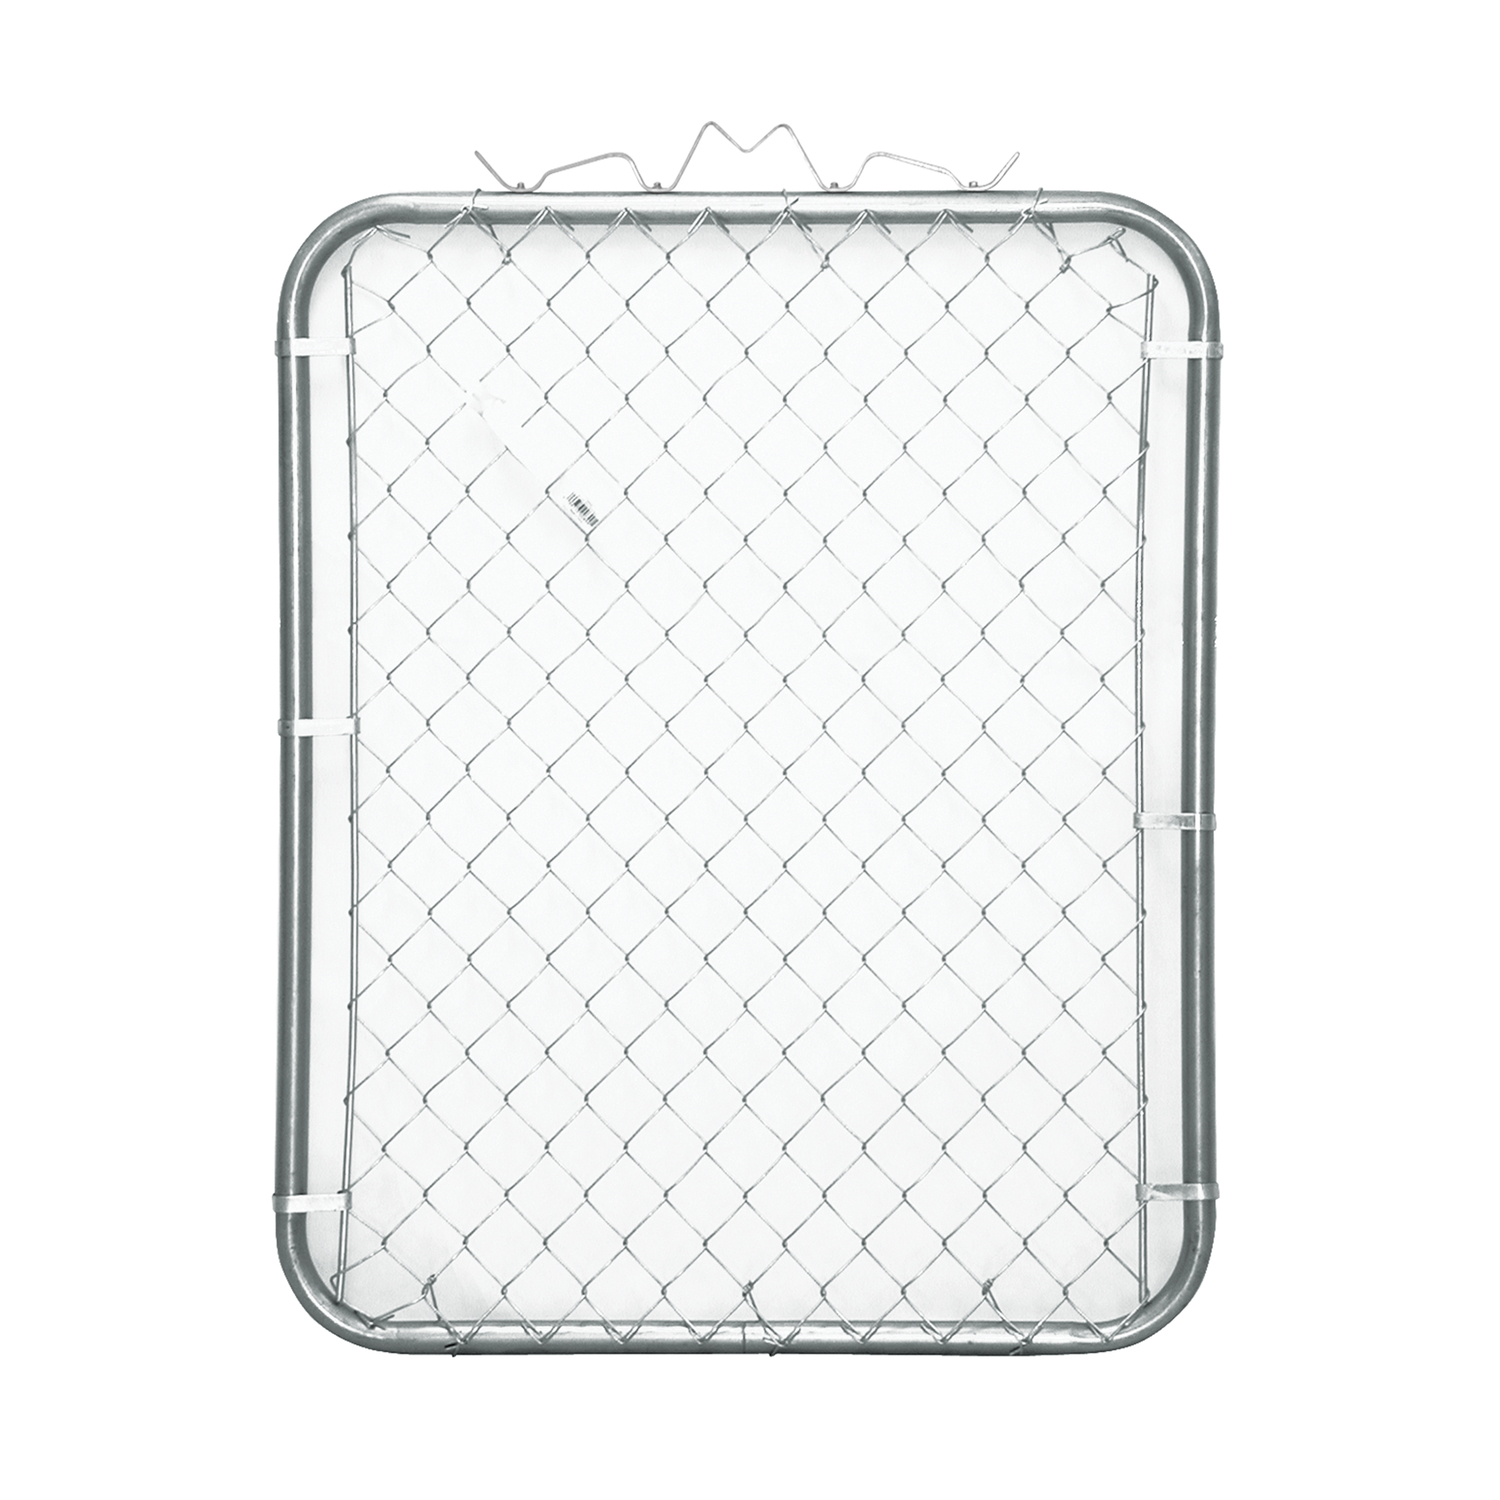 UPC 099713008229 product image for YardGard 48 in. H x 39 in. L Steel Gate Walk Silver | upcitemdb.com